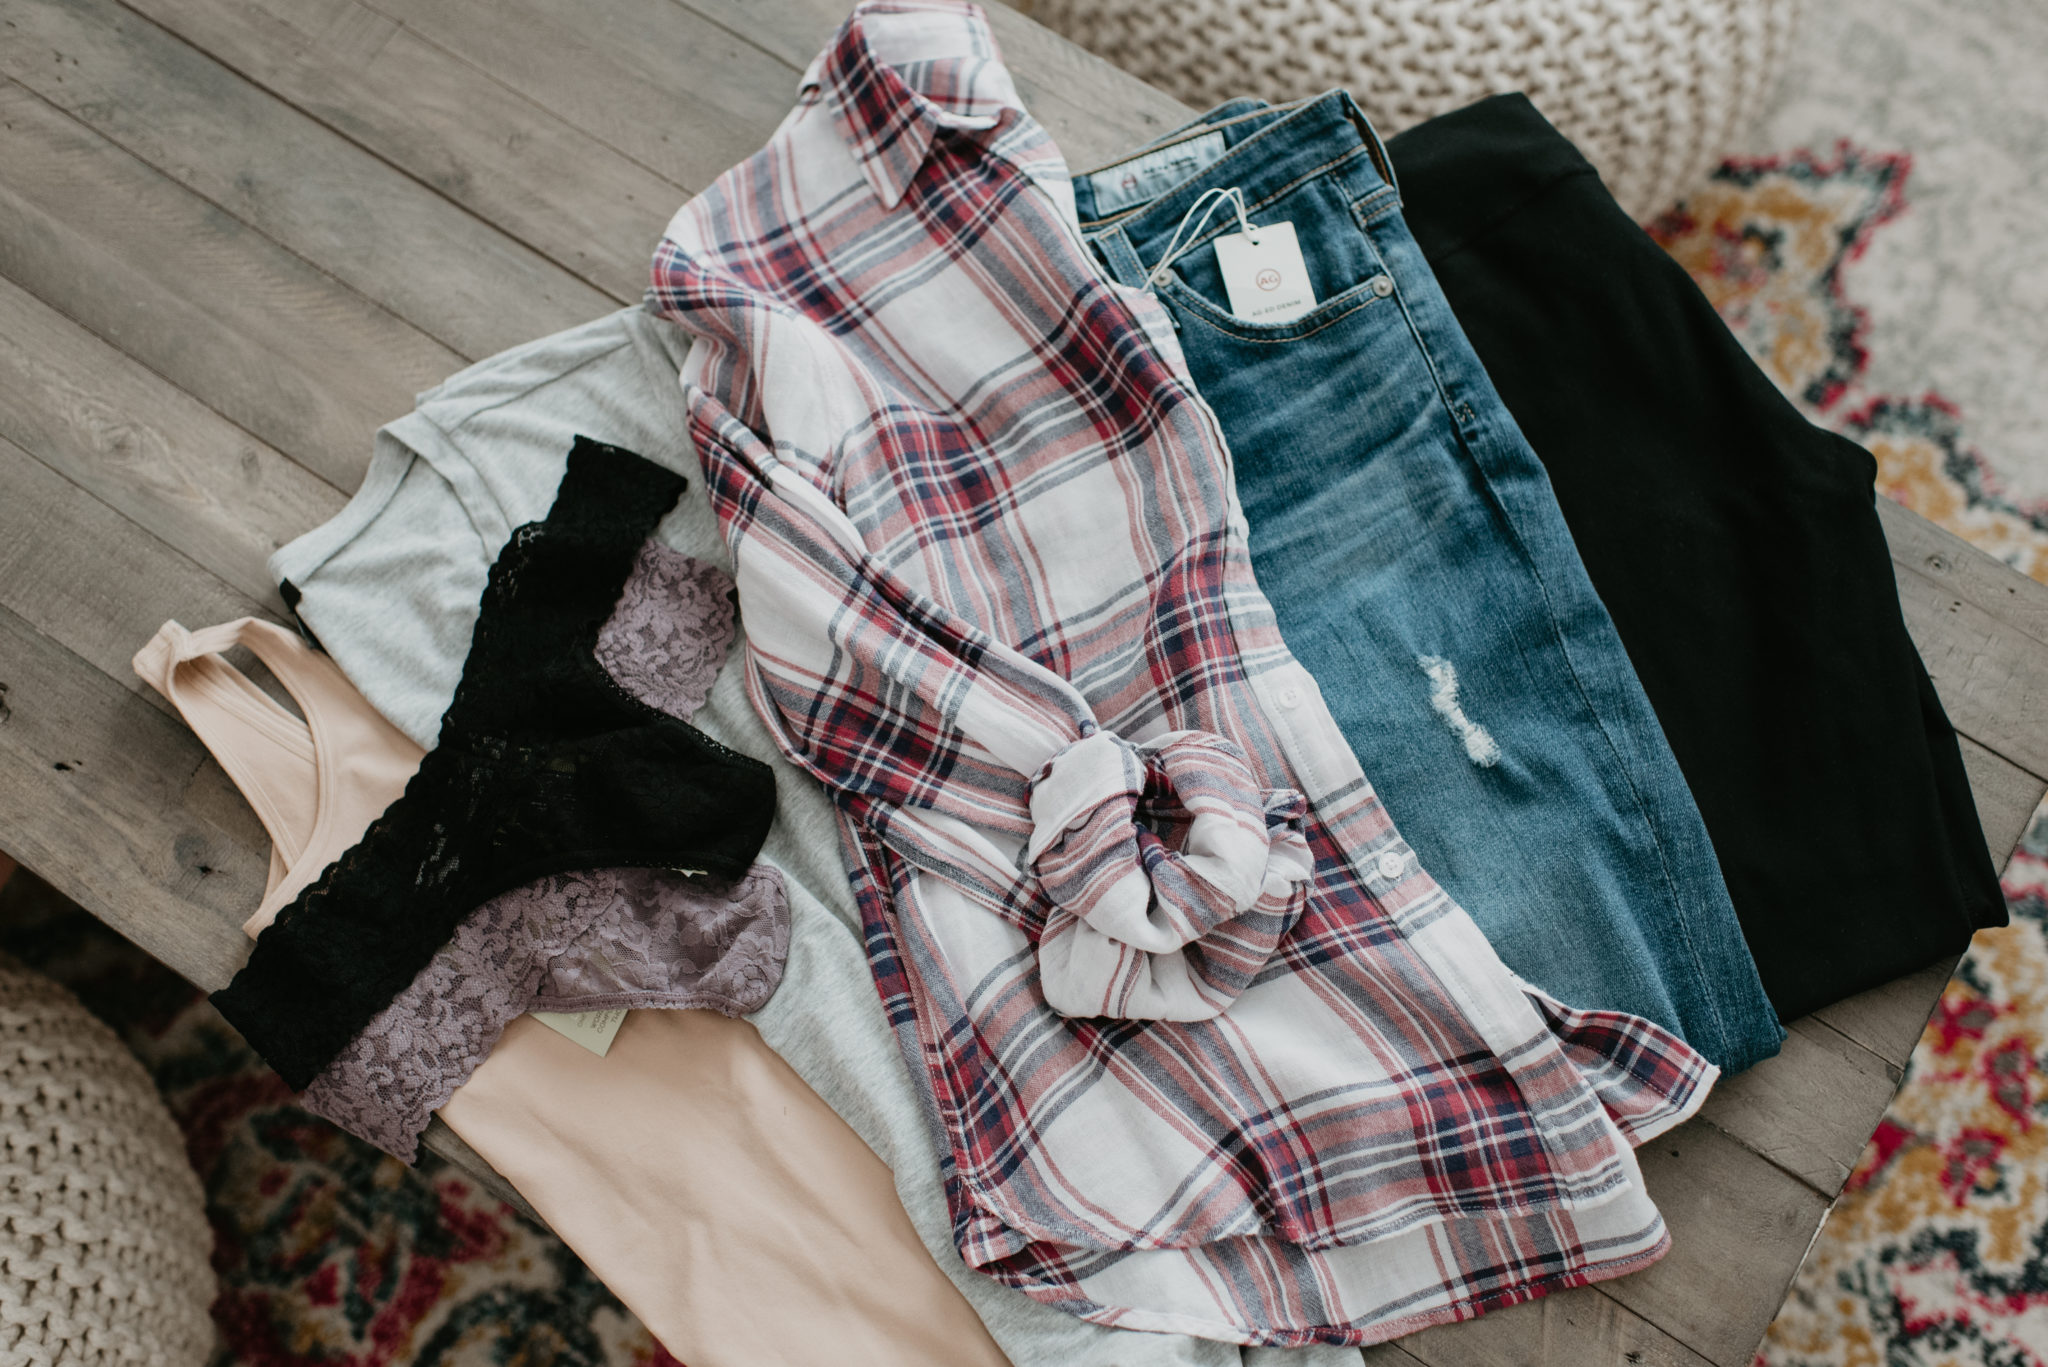 Nordstrom Anniversary Sale: Women's Fashion at Different Price Points featured by popular Las Vegas fashion blogger, Outfits & Outings